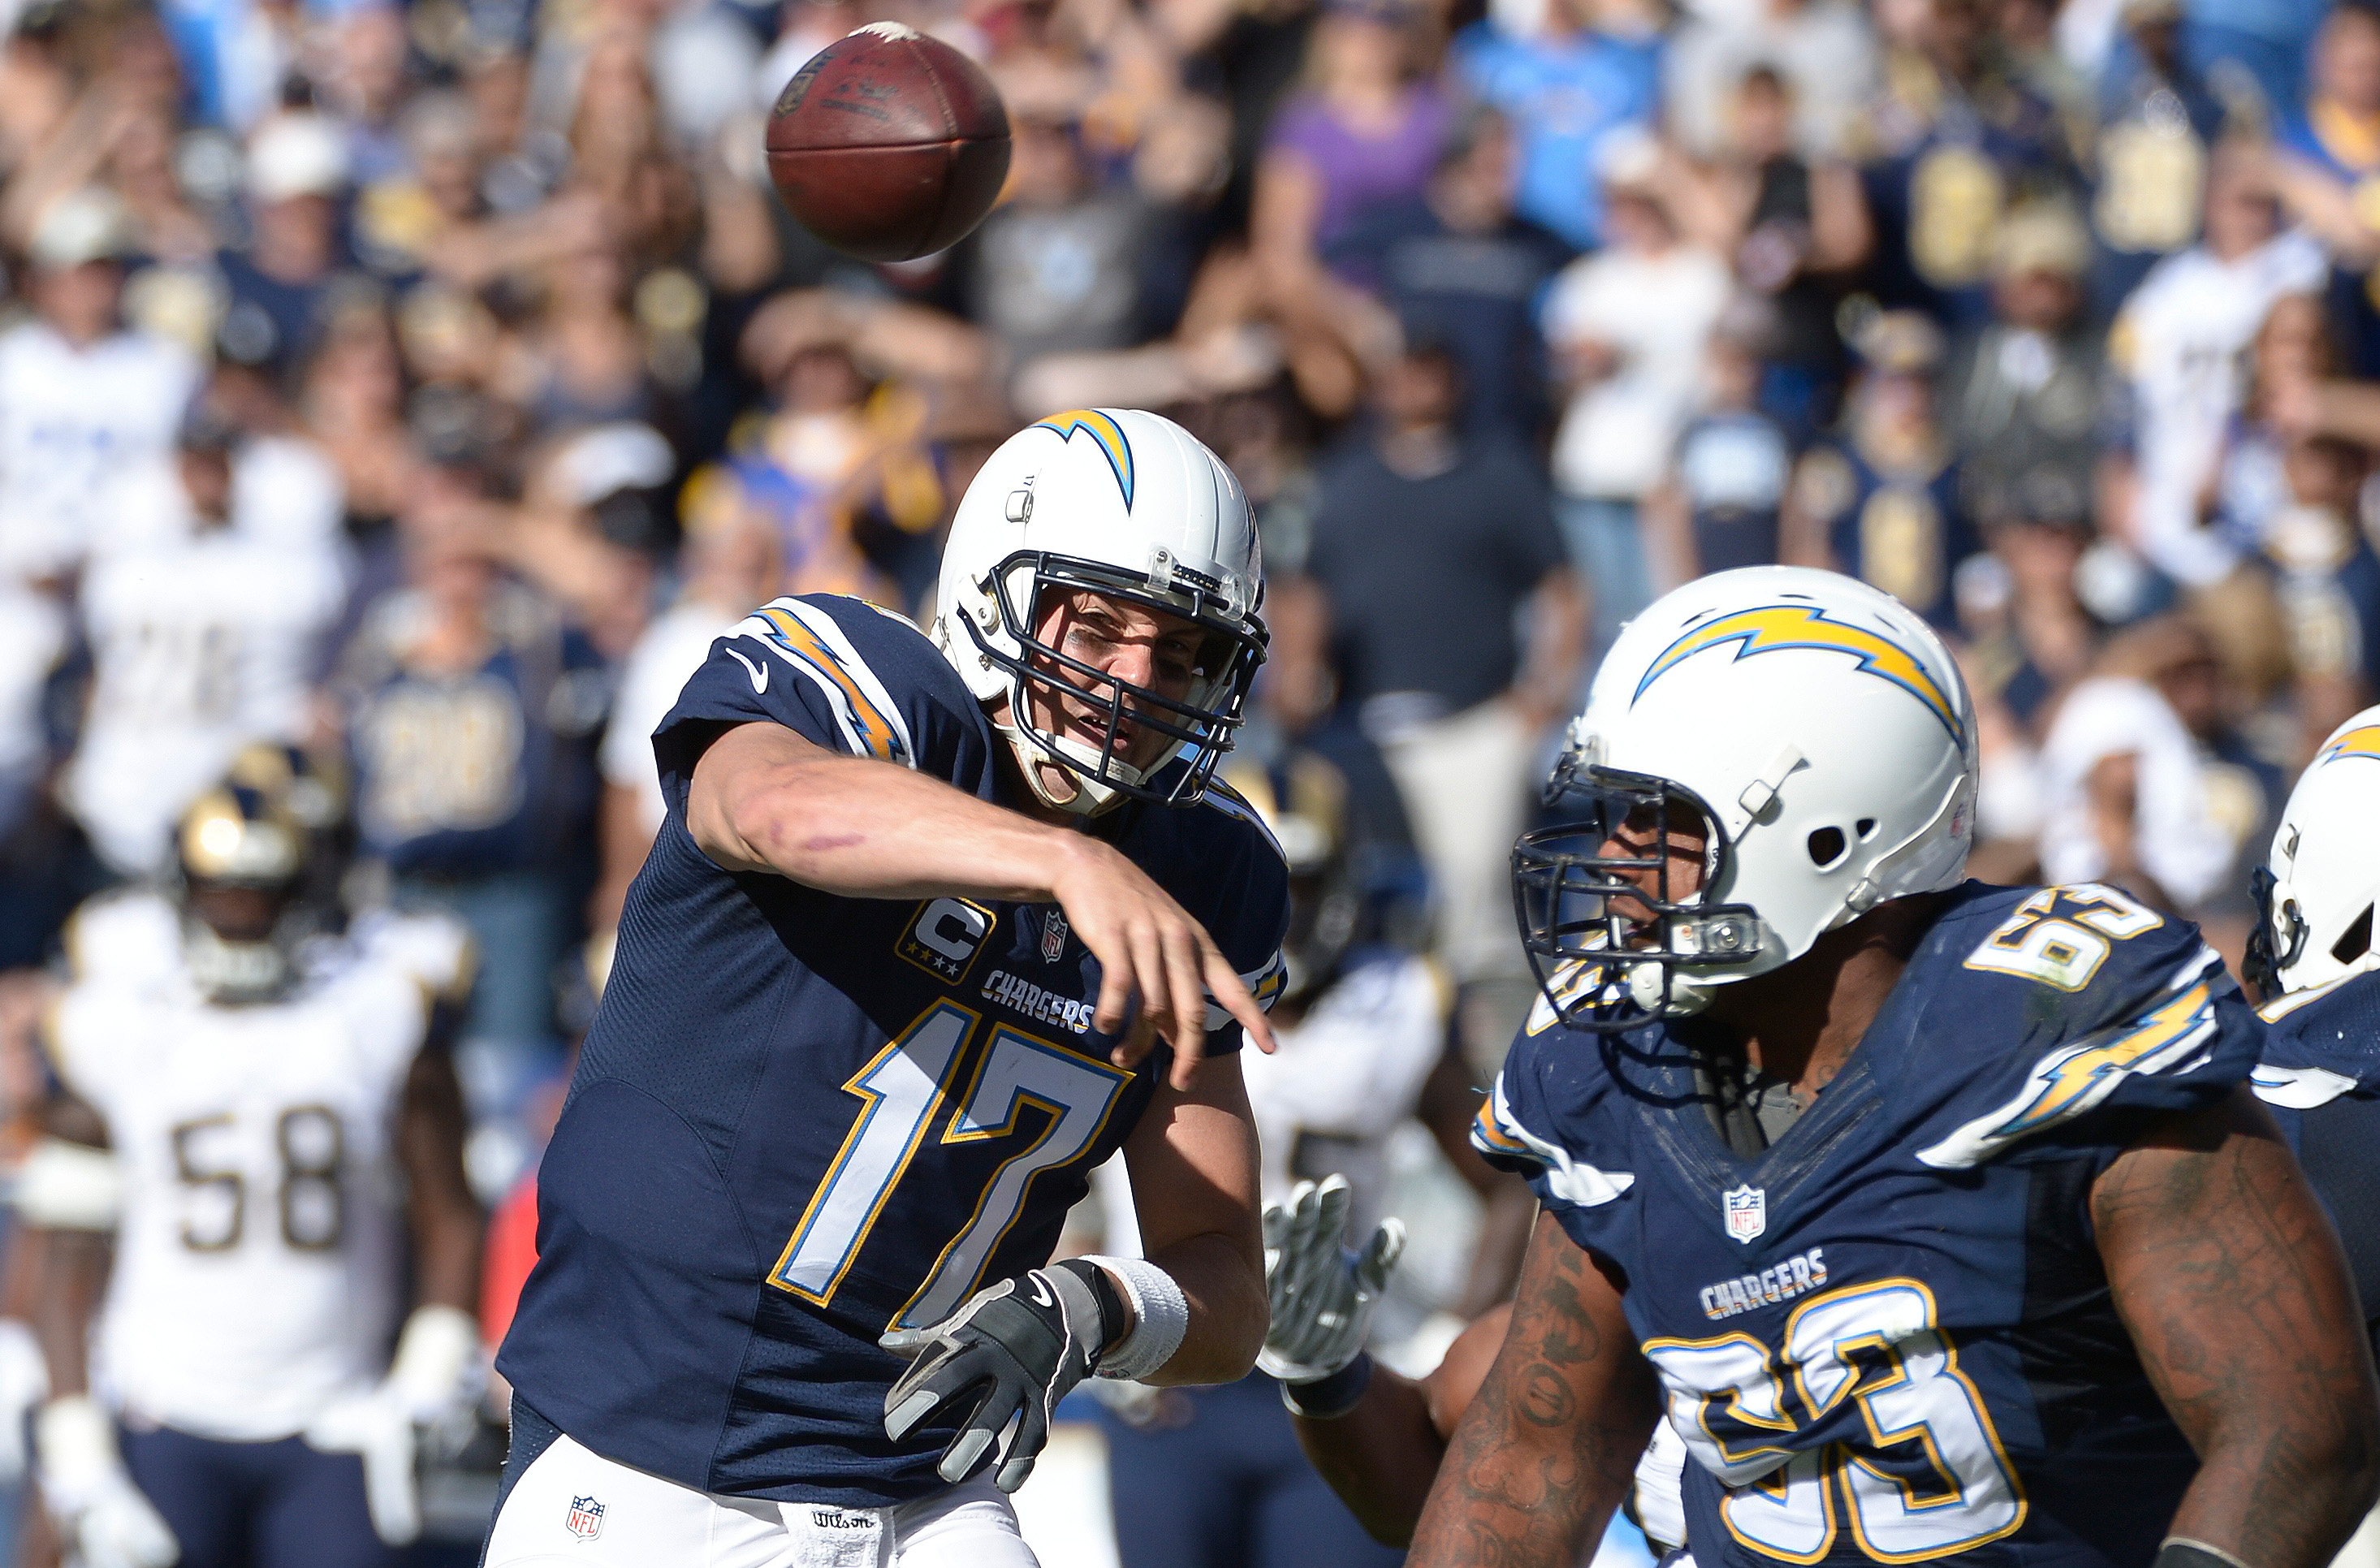 NFL: St. Louis Rams at San Diego Chargers